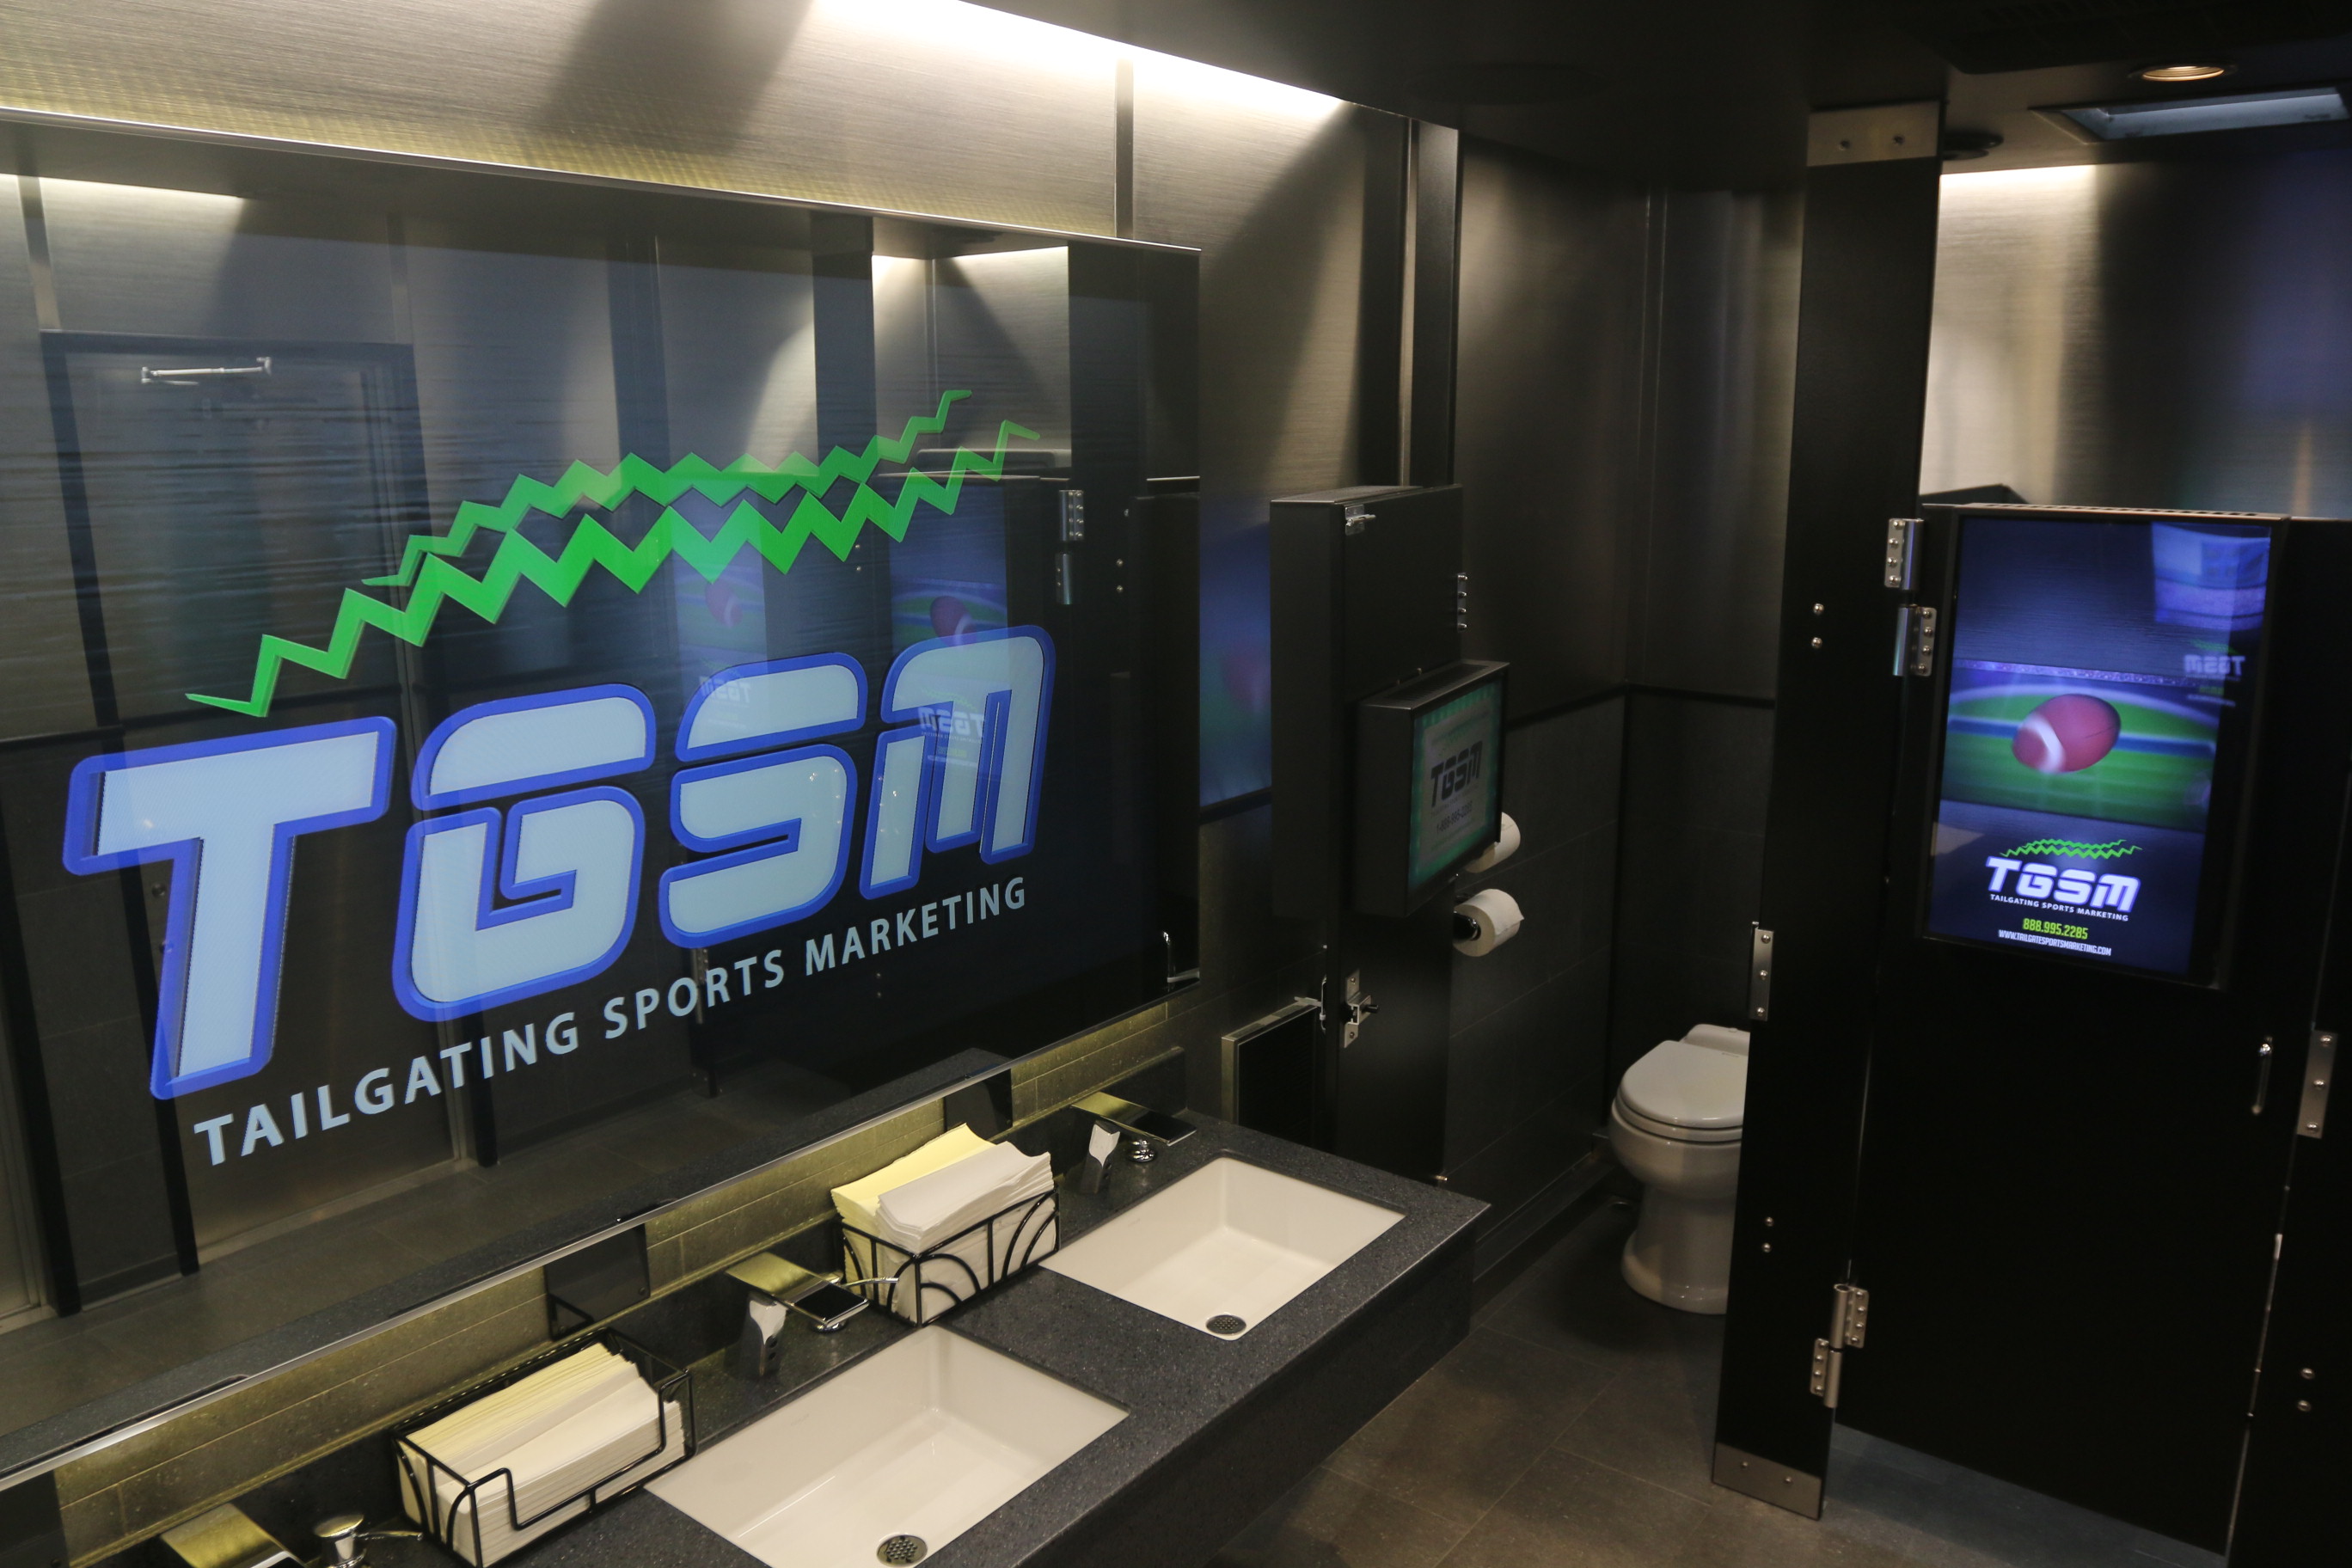 Interior shot of a digital interactive restroom trailer from Tailgating Sports Marketing.